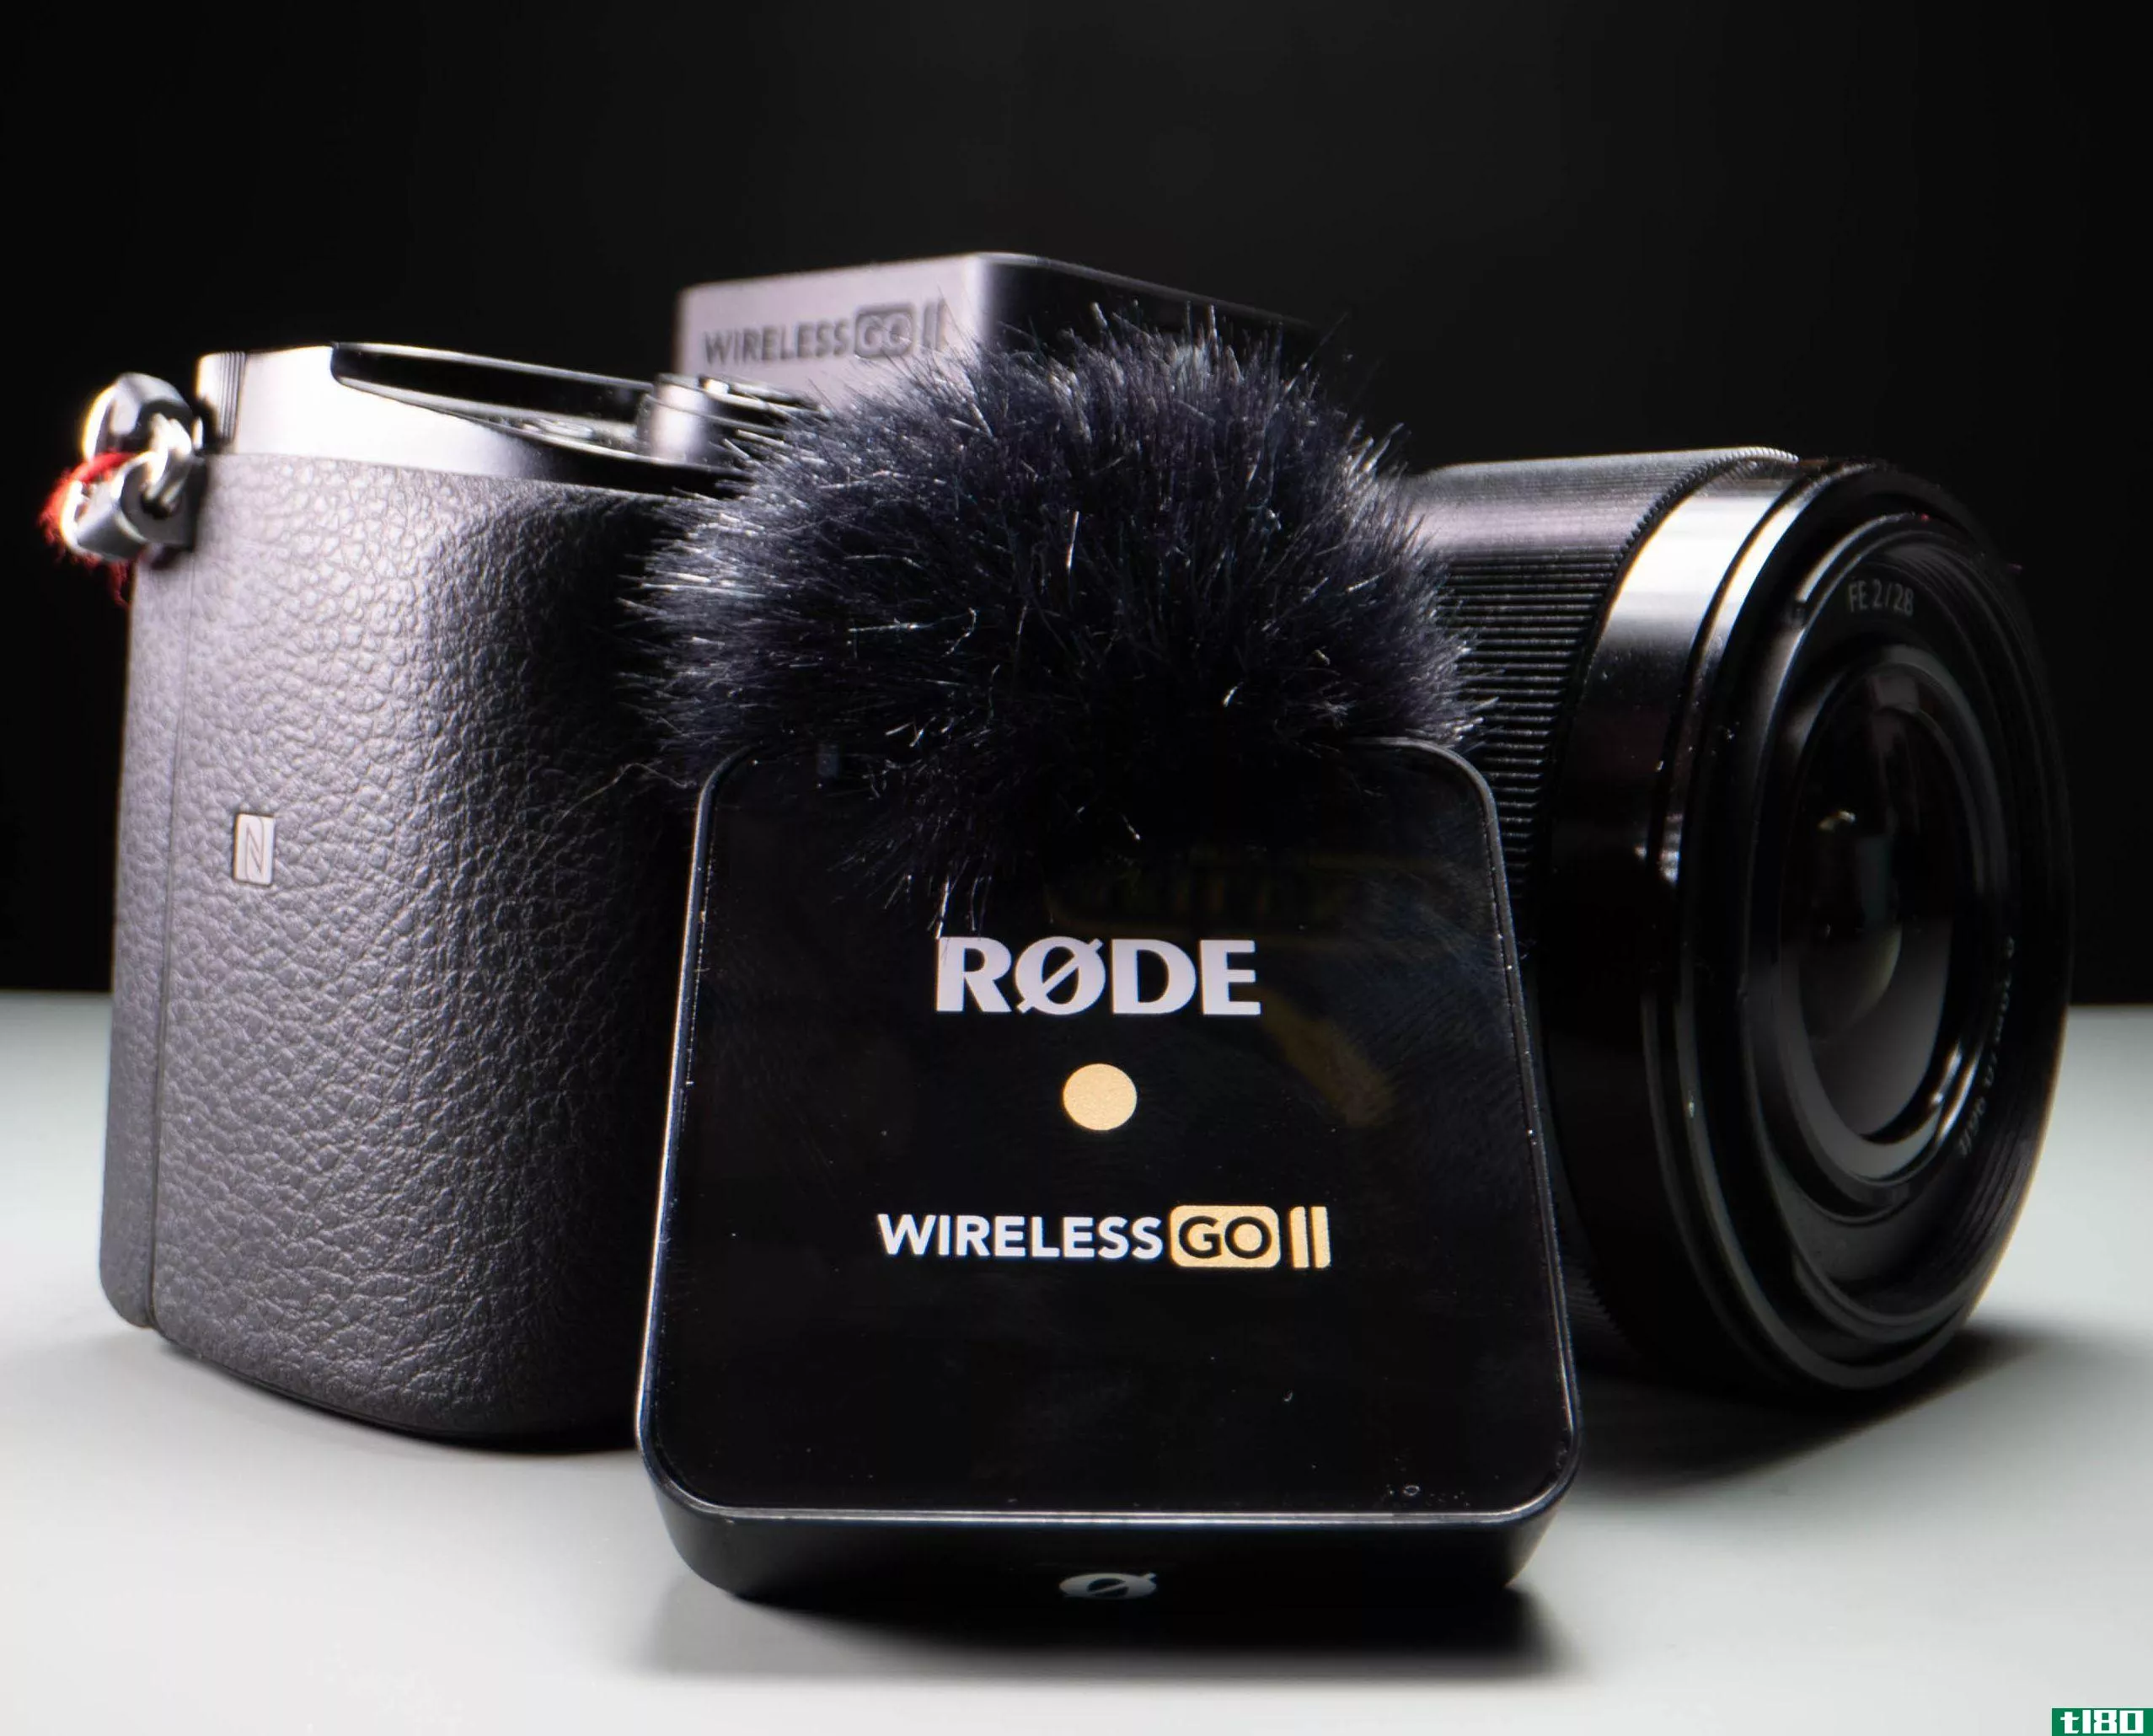 Rode Wireless Go II Connected to Sony a6100